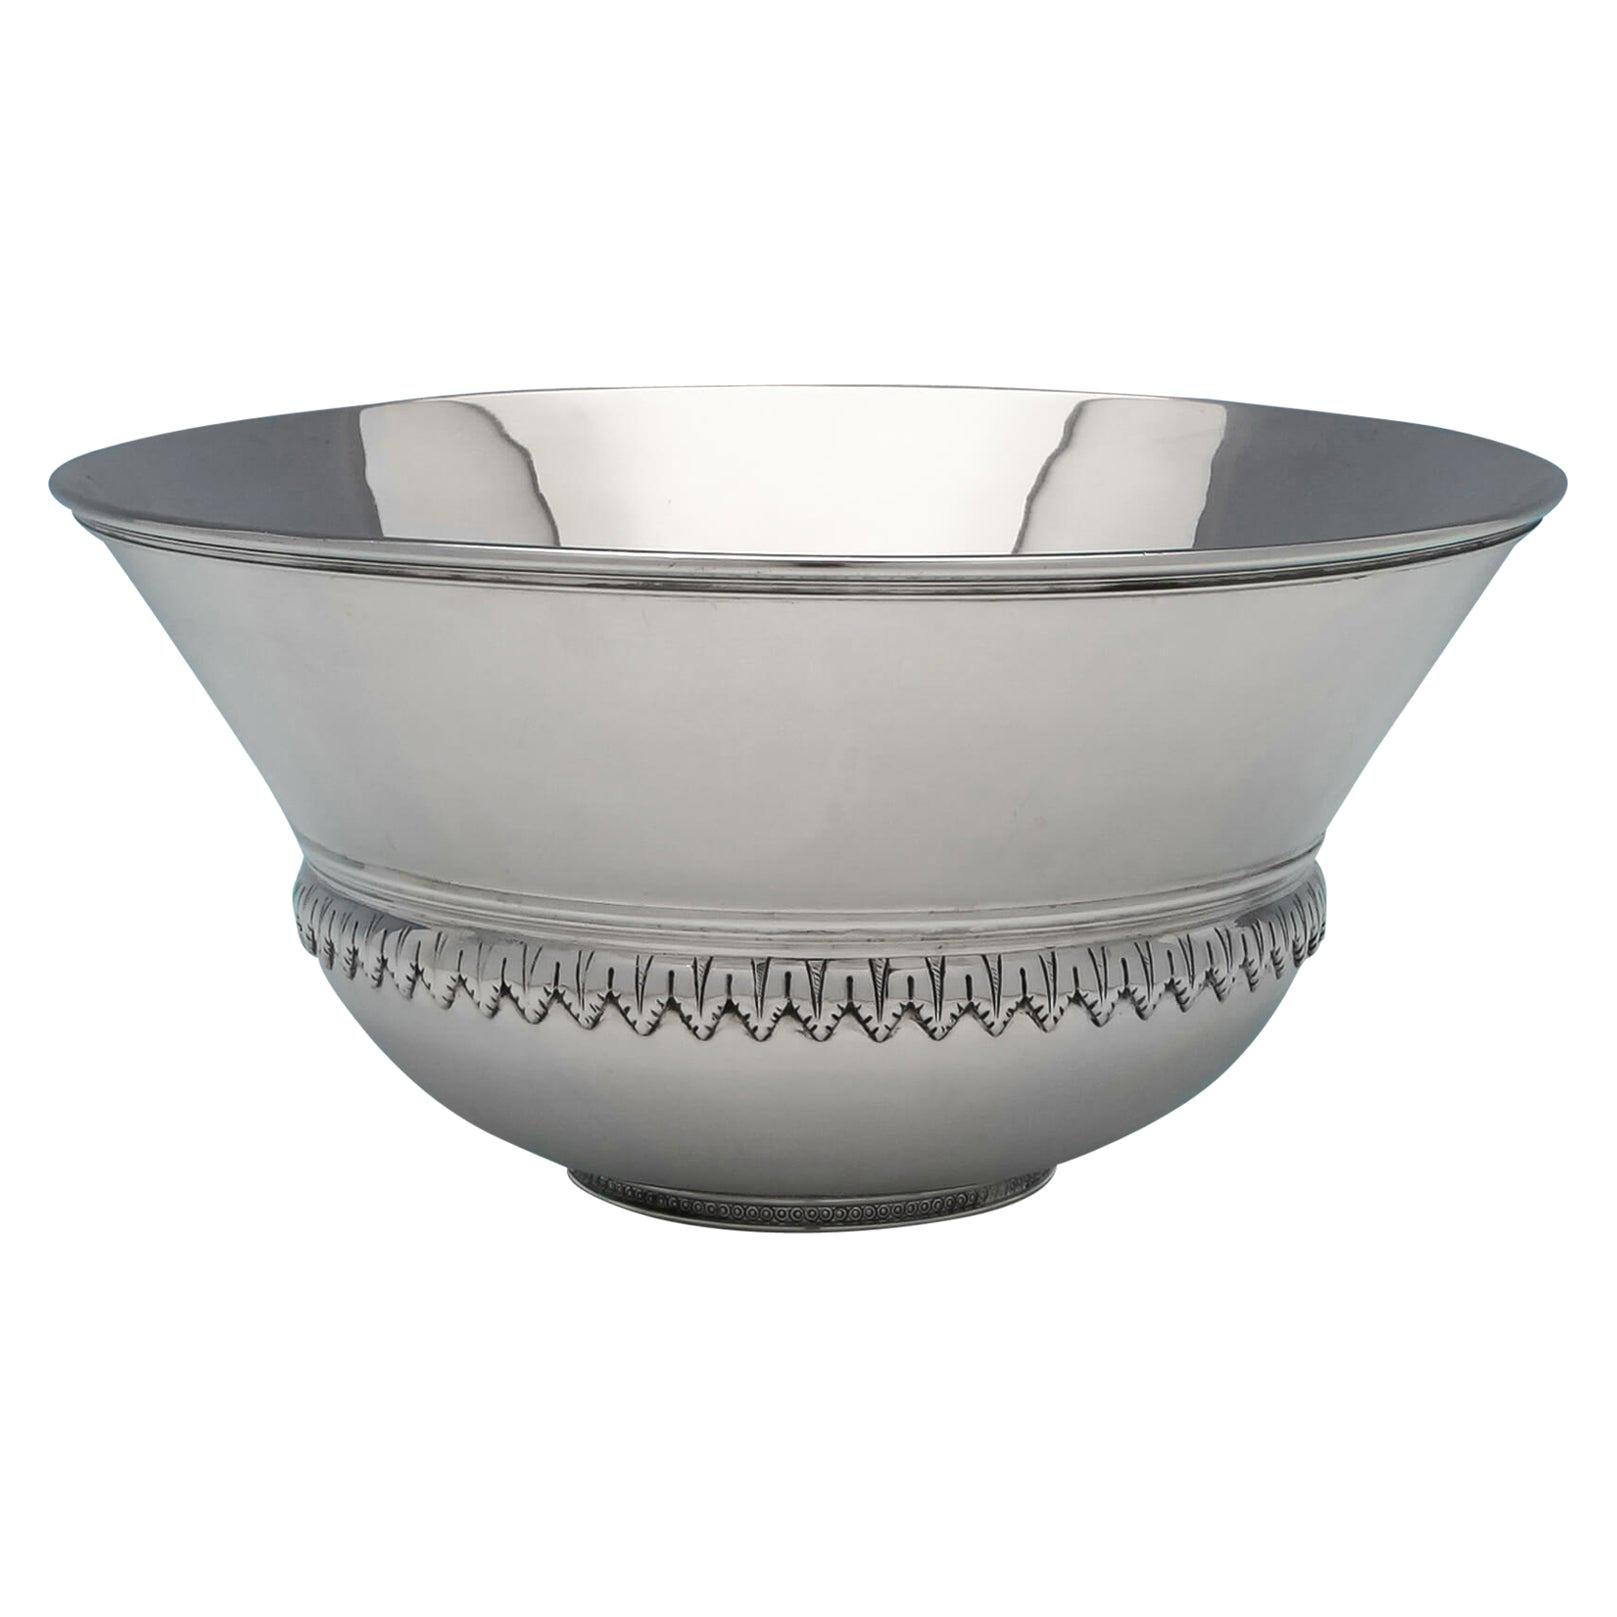 Art Deco Sterling Silver 'Mazer' Bowl by Richard Comyns in 1936